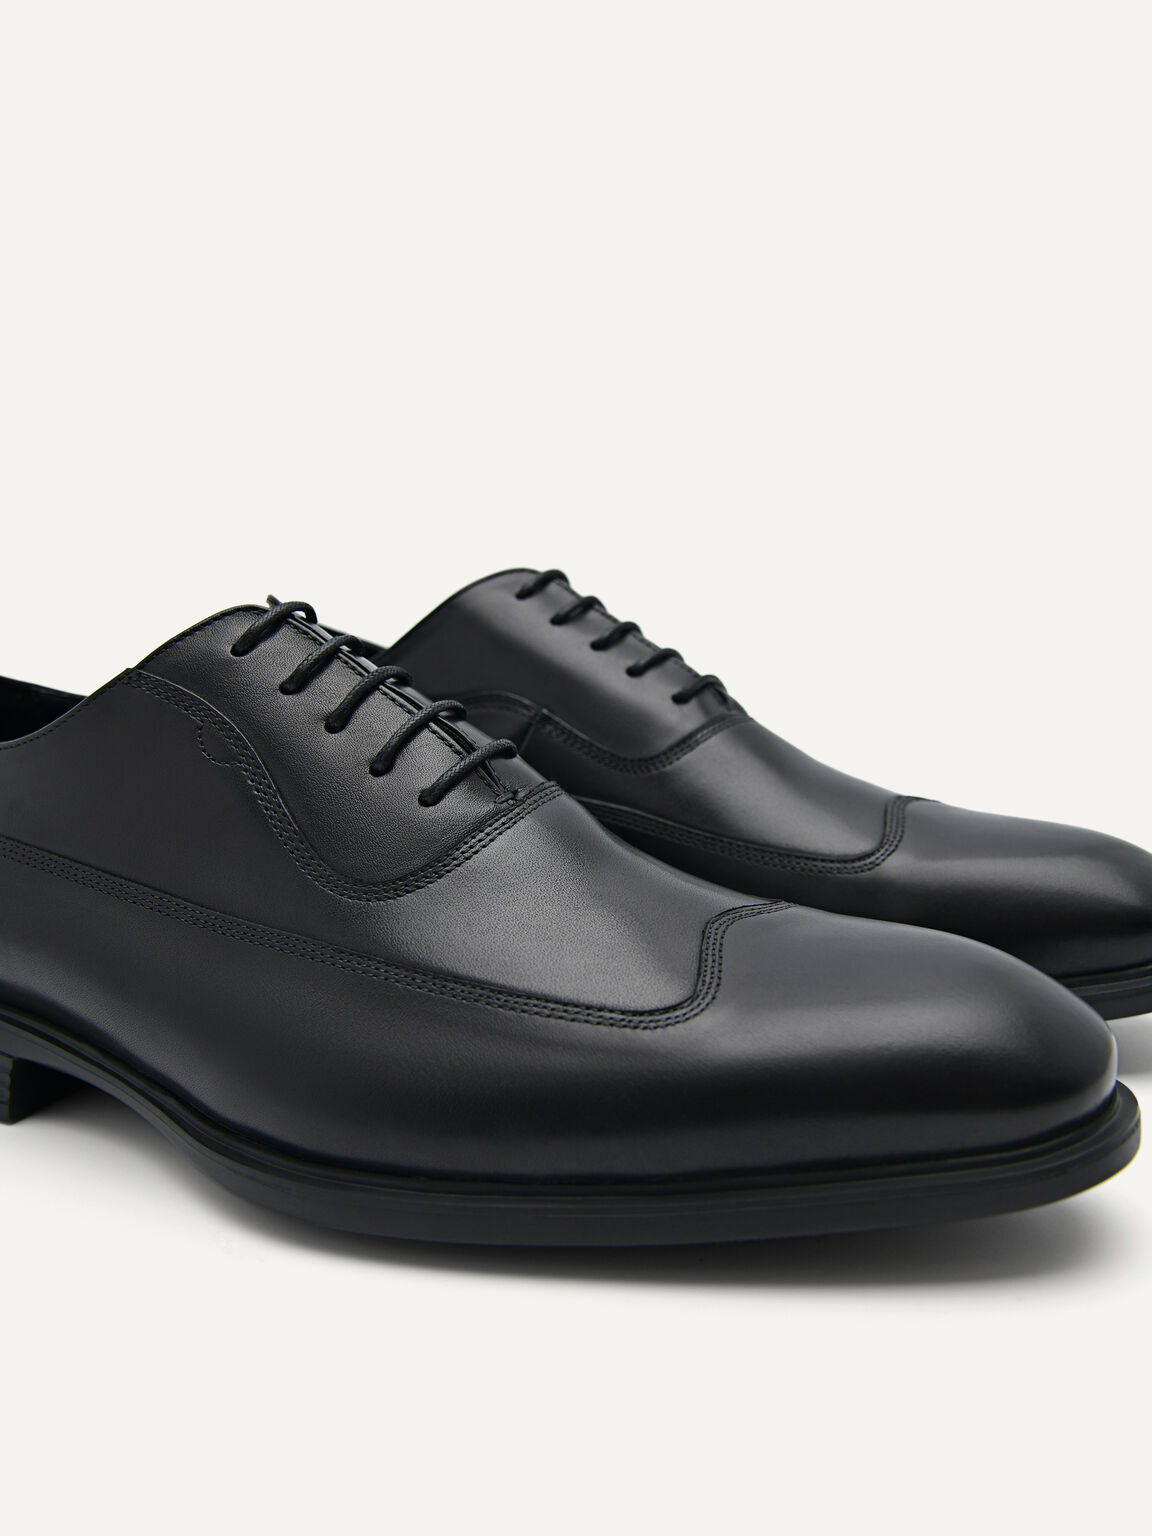 Dylan Leather Oxford Shoes, Black